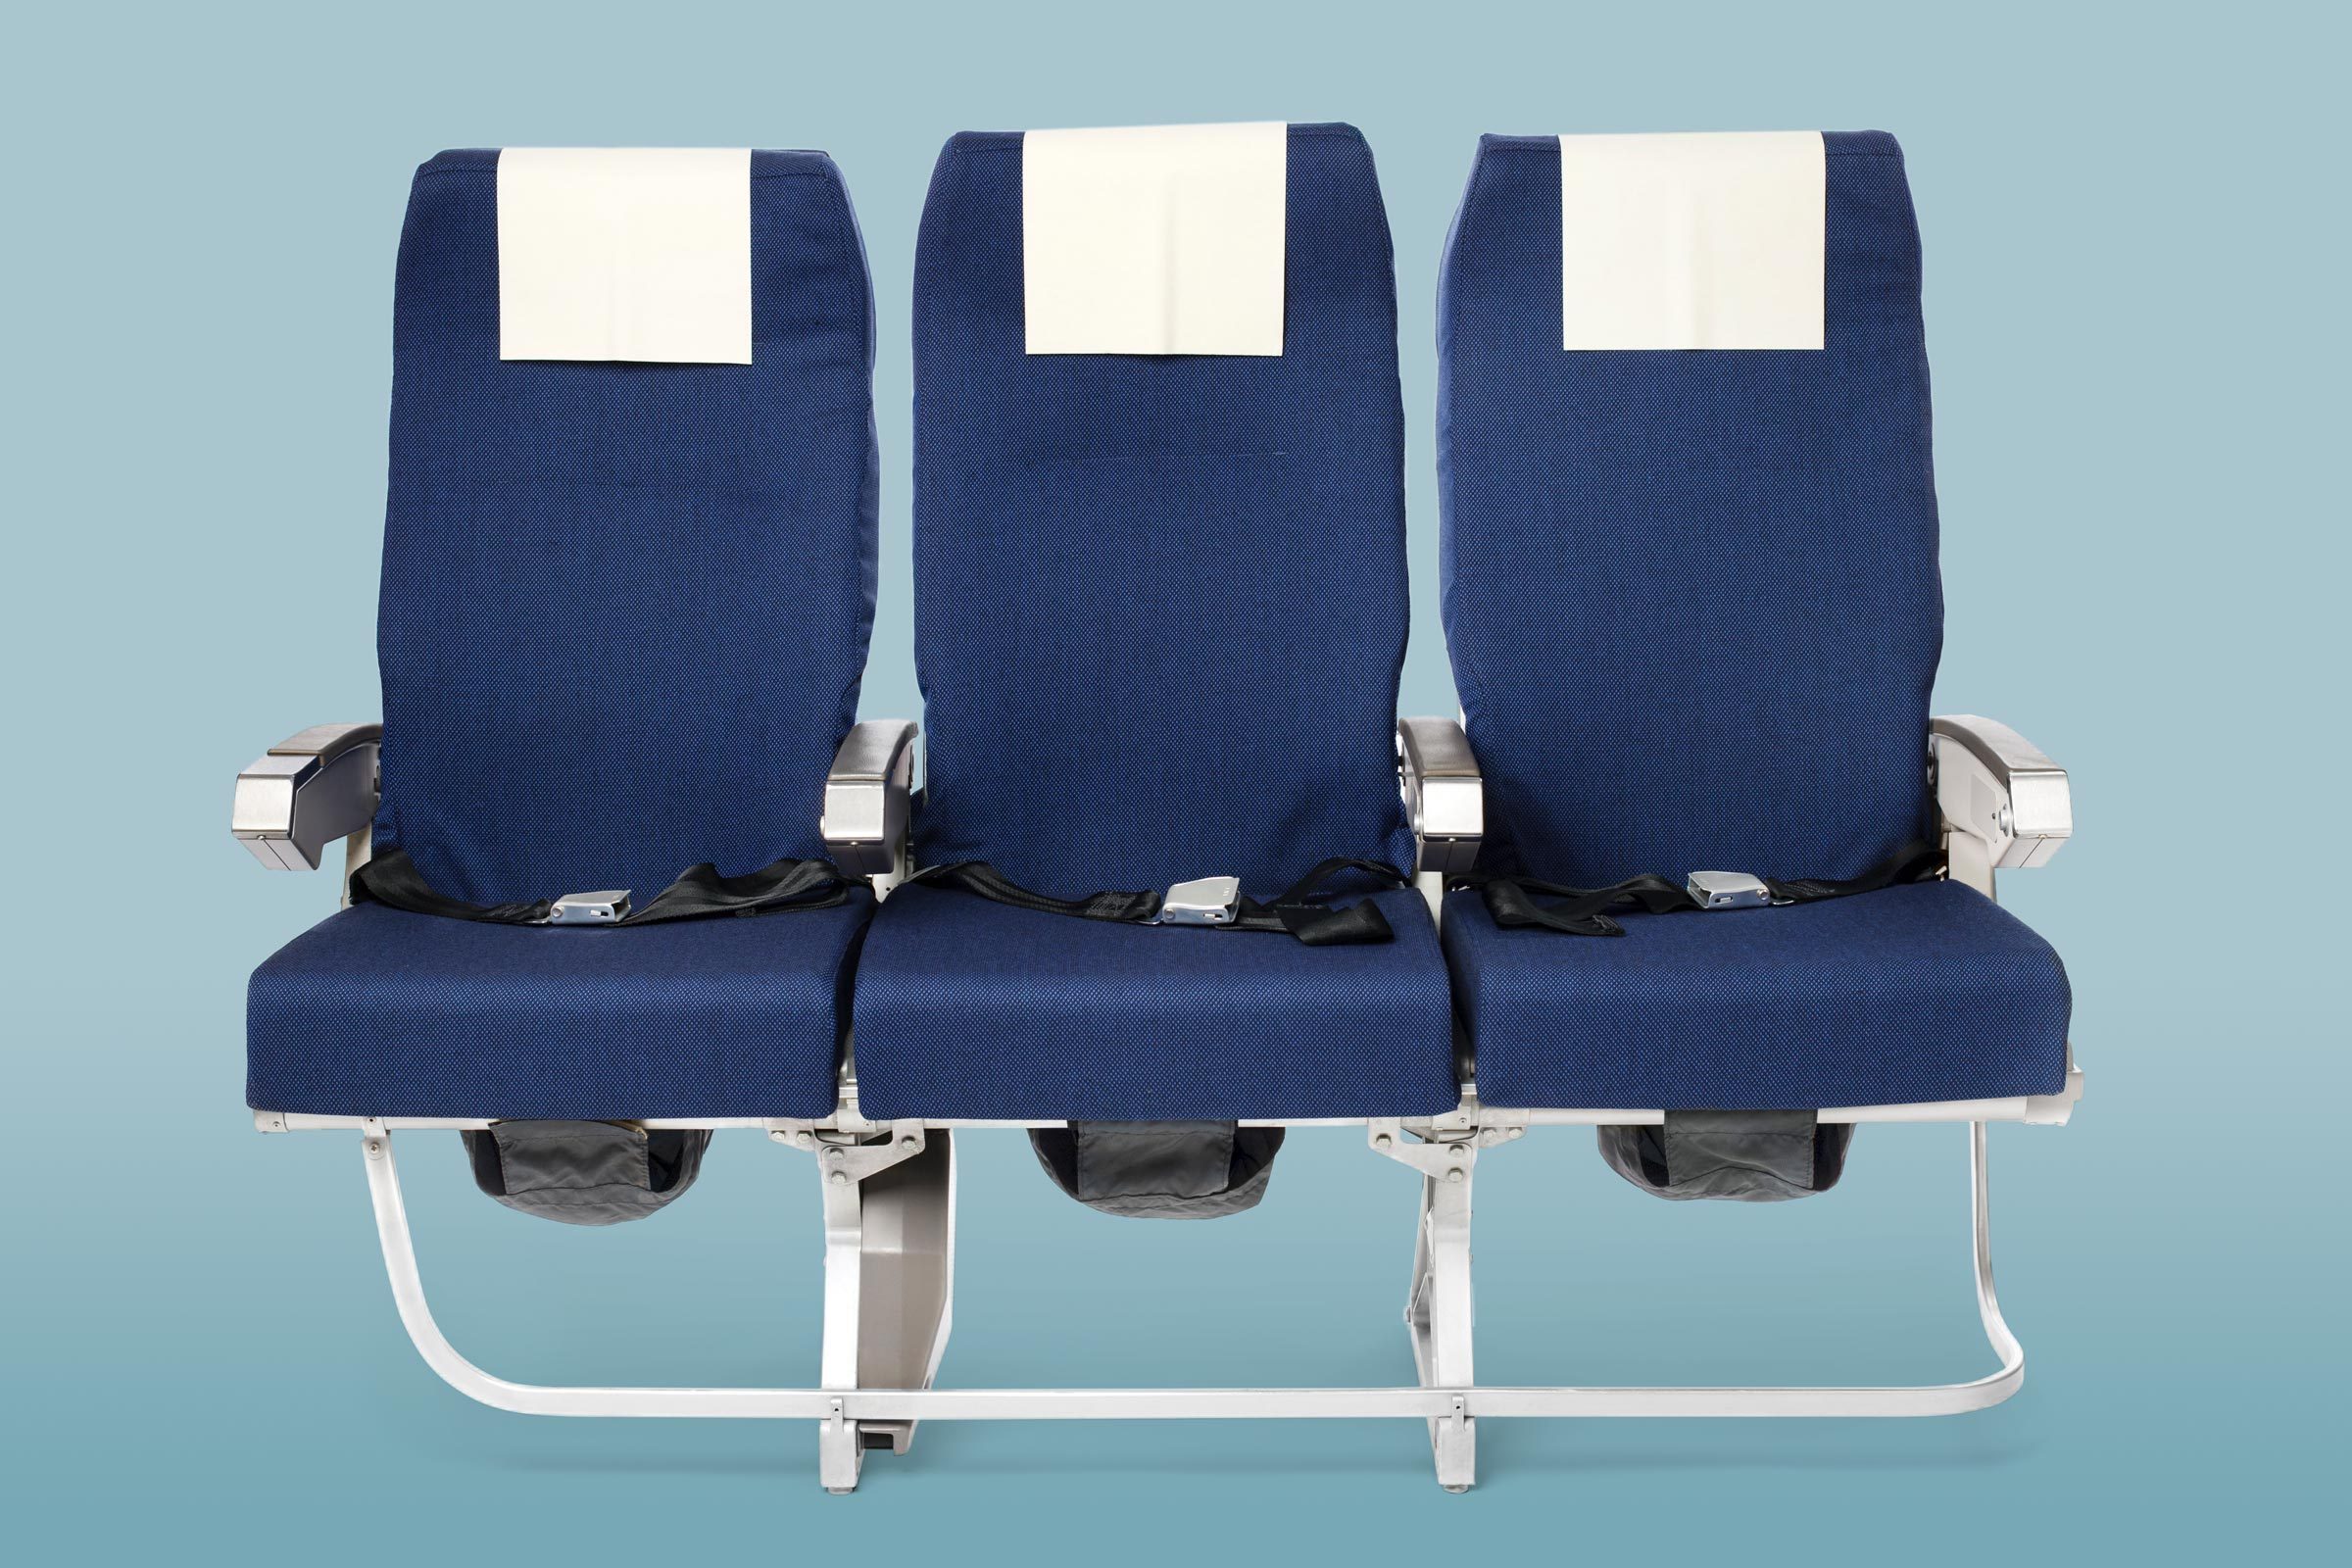 Why Do Some Airplanes Have Rear-Facing Seats?